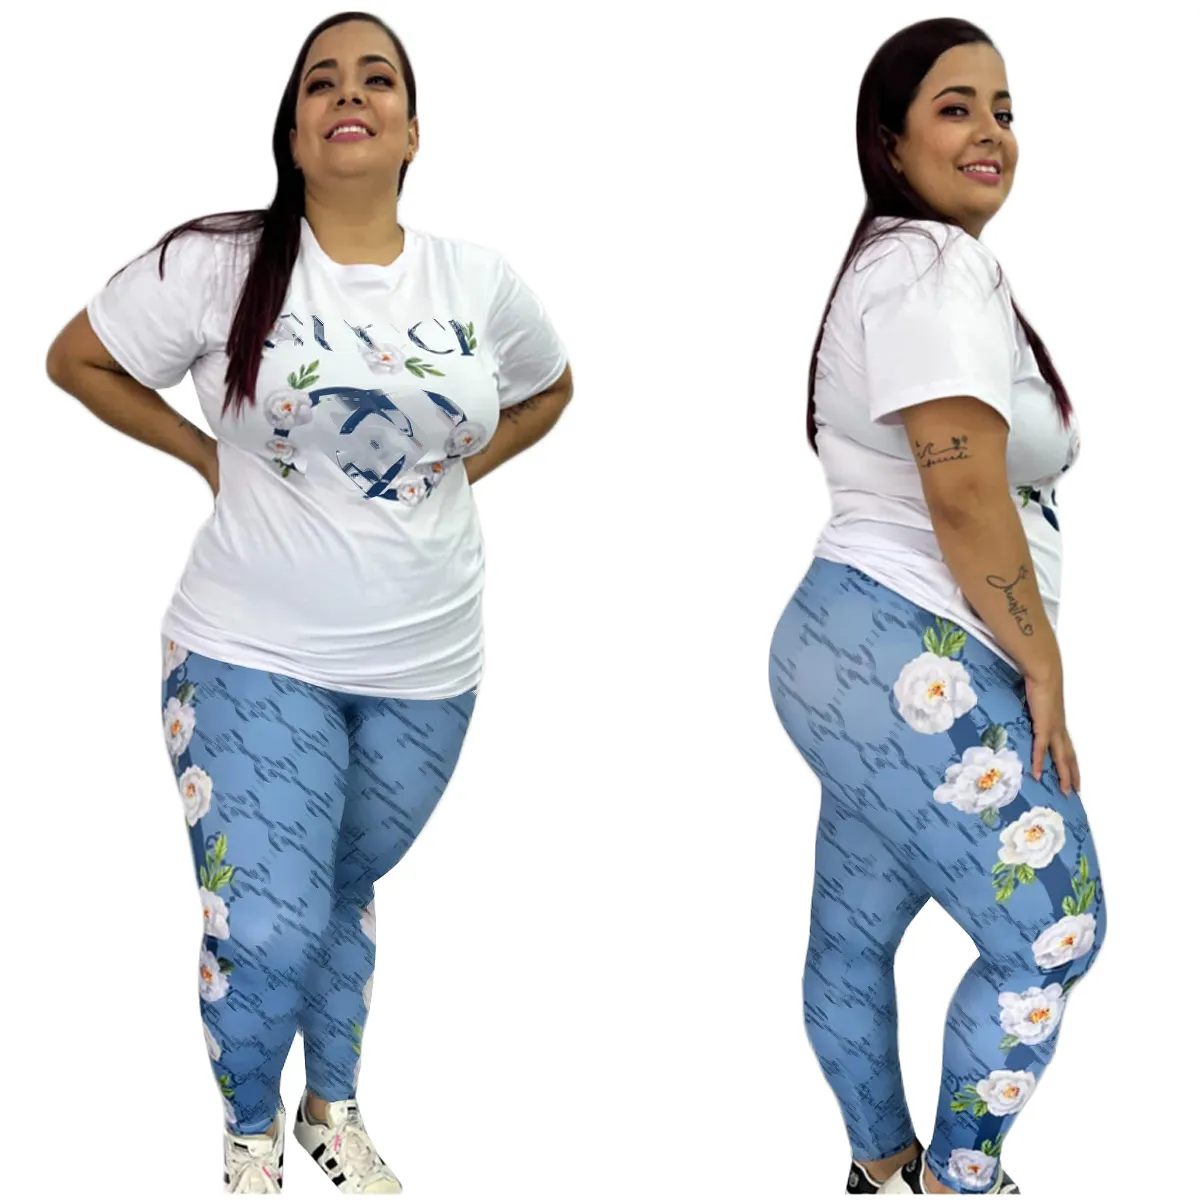 Designer new summer women's T-shirt short-sleeved printed casual sports suit female jogging suit 1XL-5XL